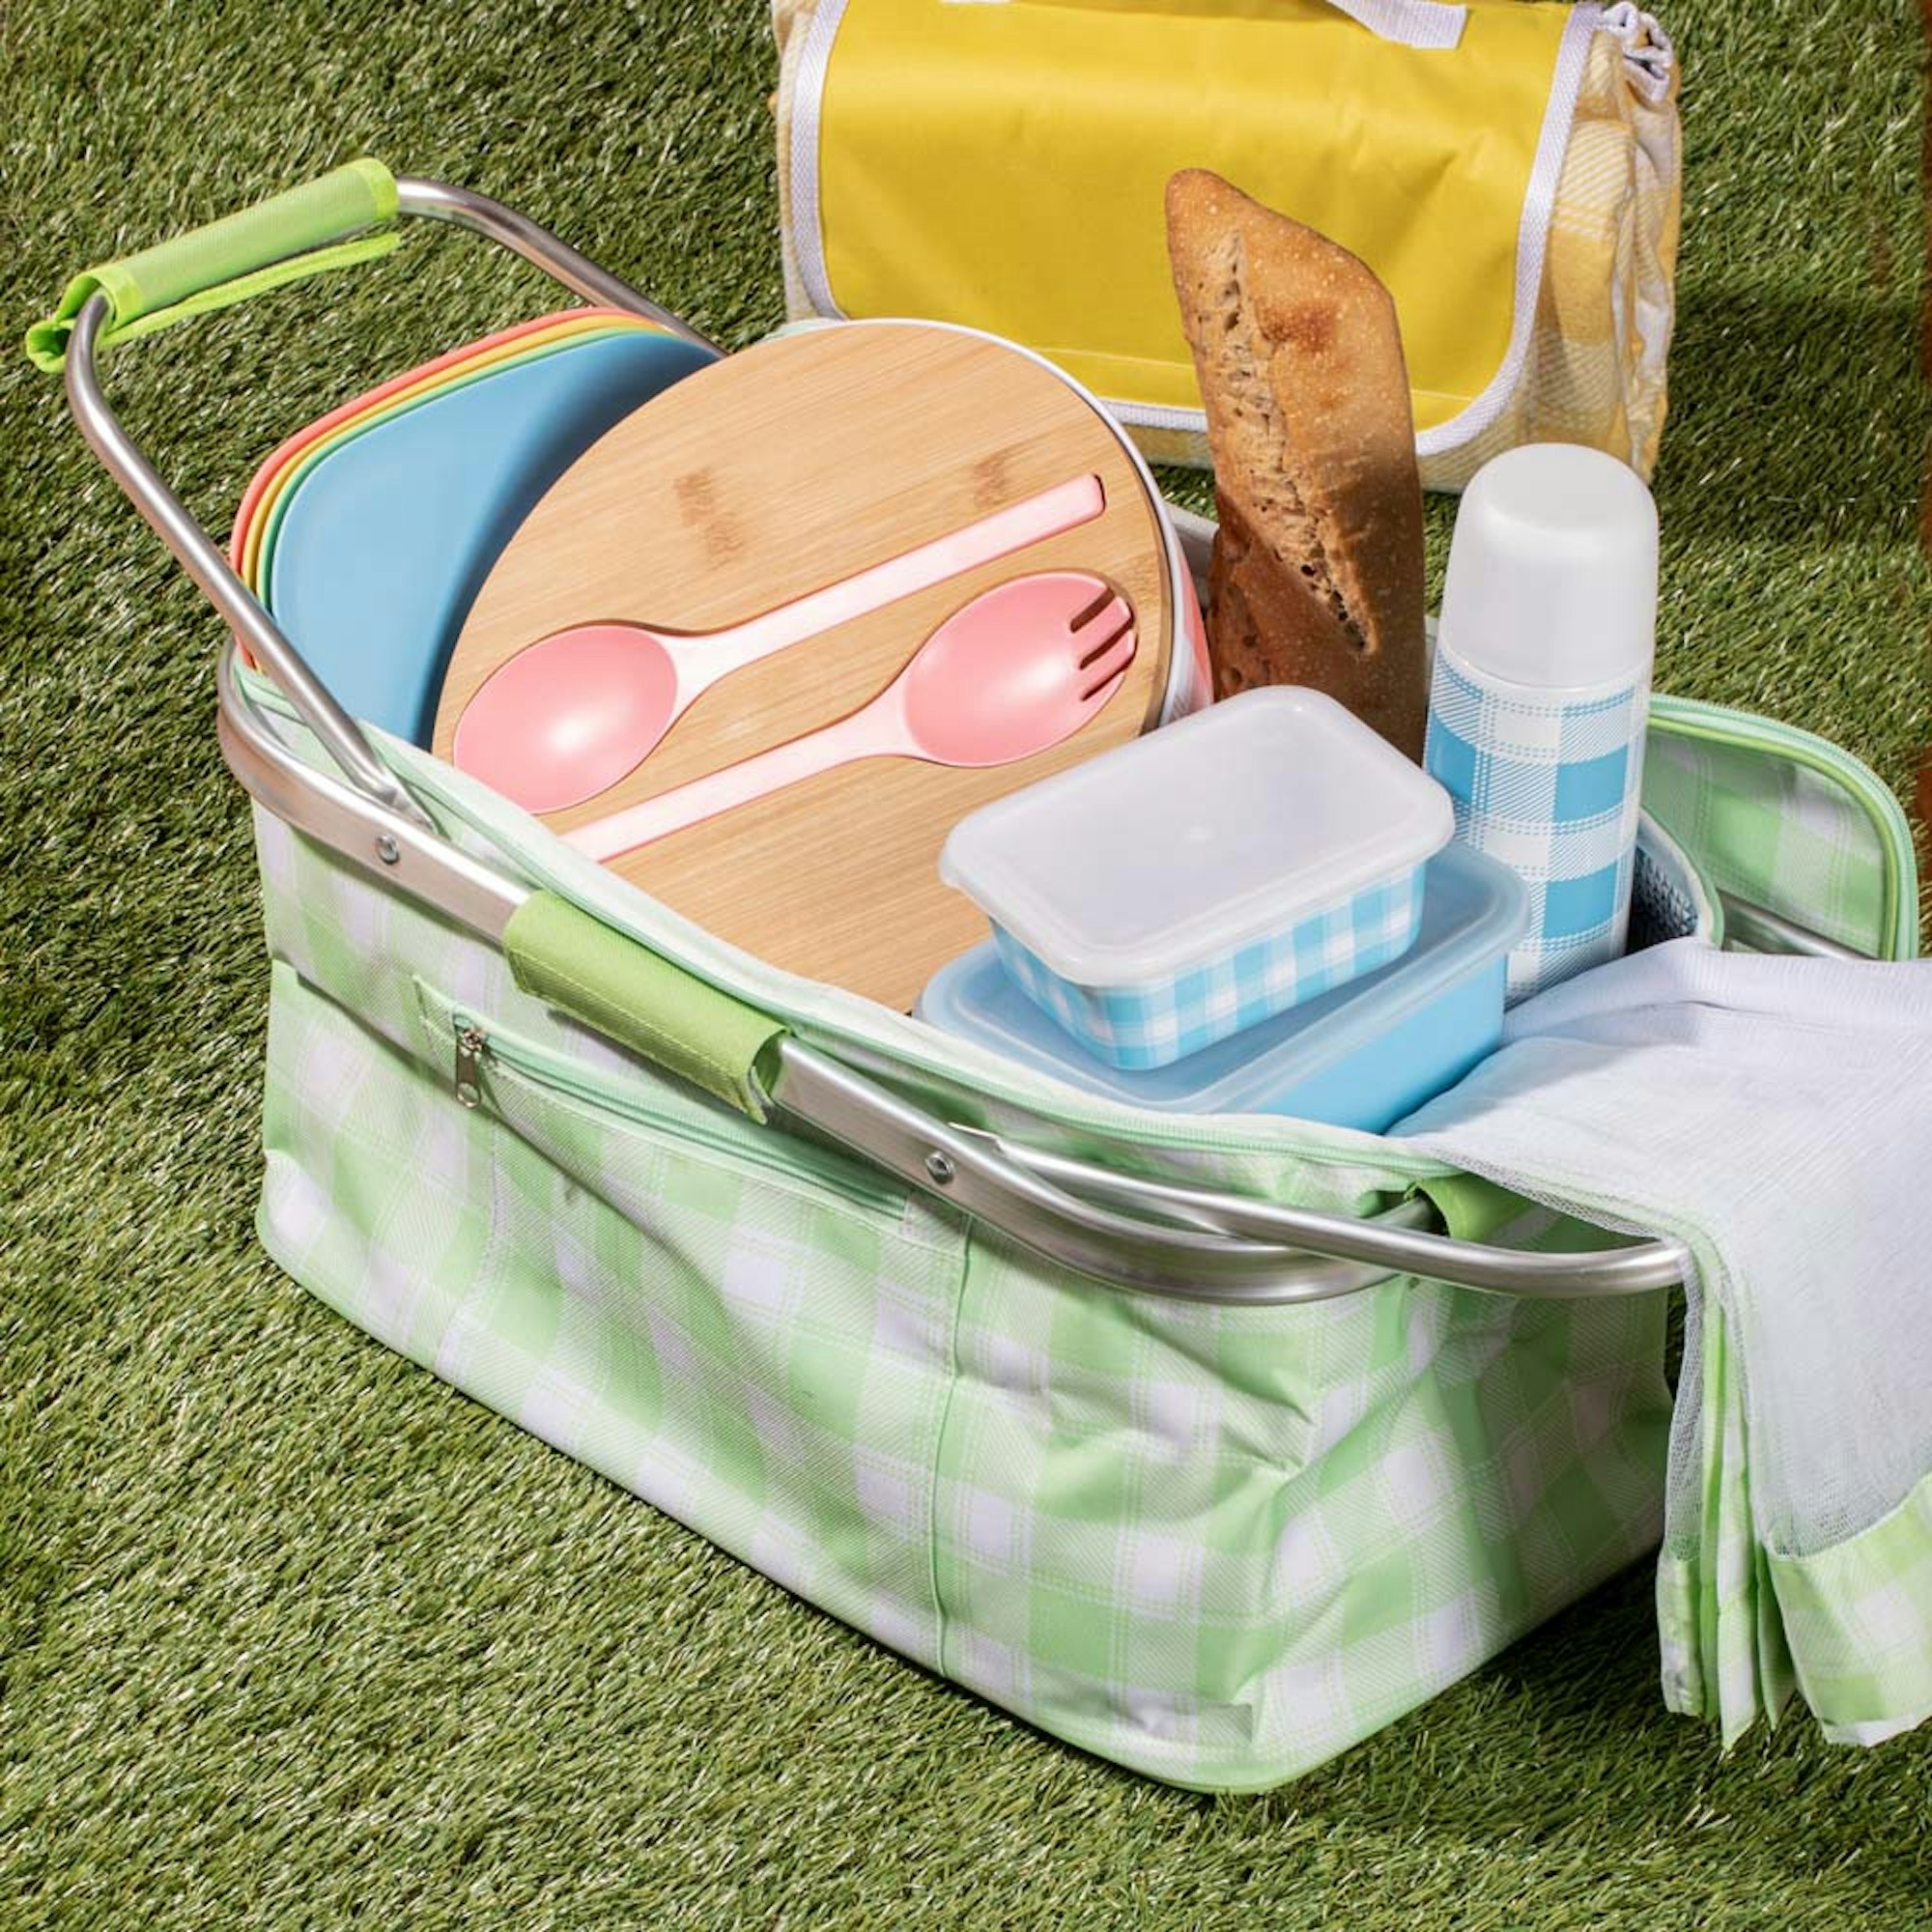 Green and white gingham picnic basket with picnicware